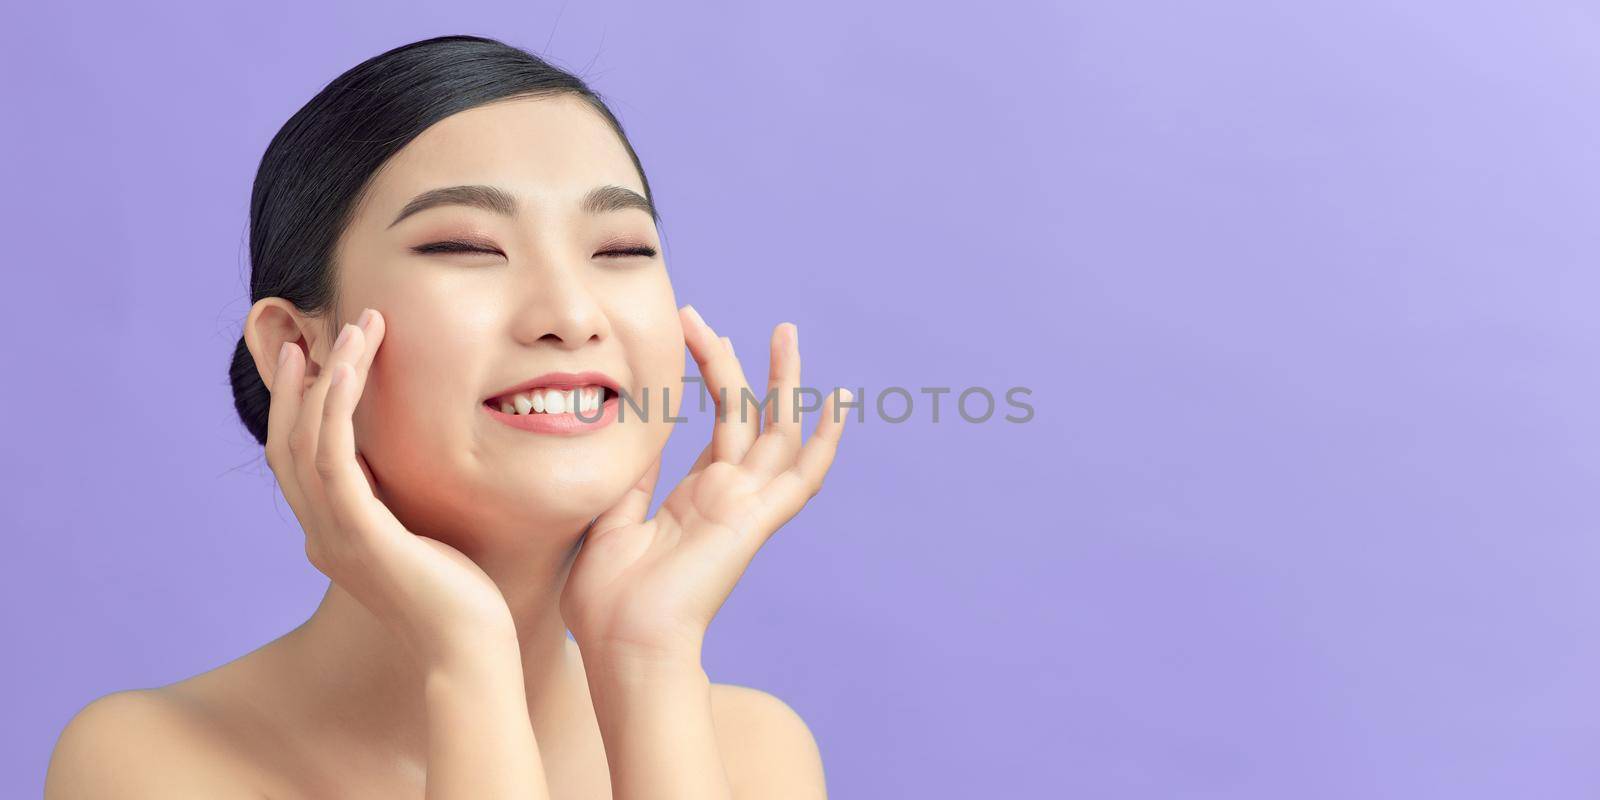 Woman with beauty face touching healthy facial skin portrait by makidotvn